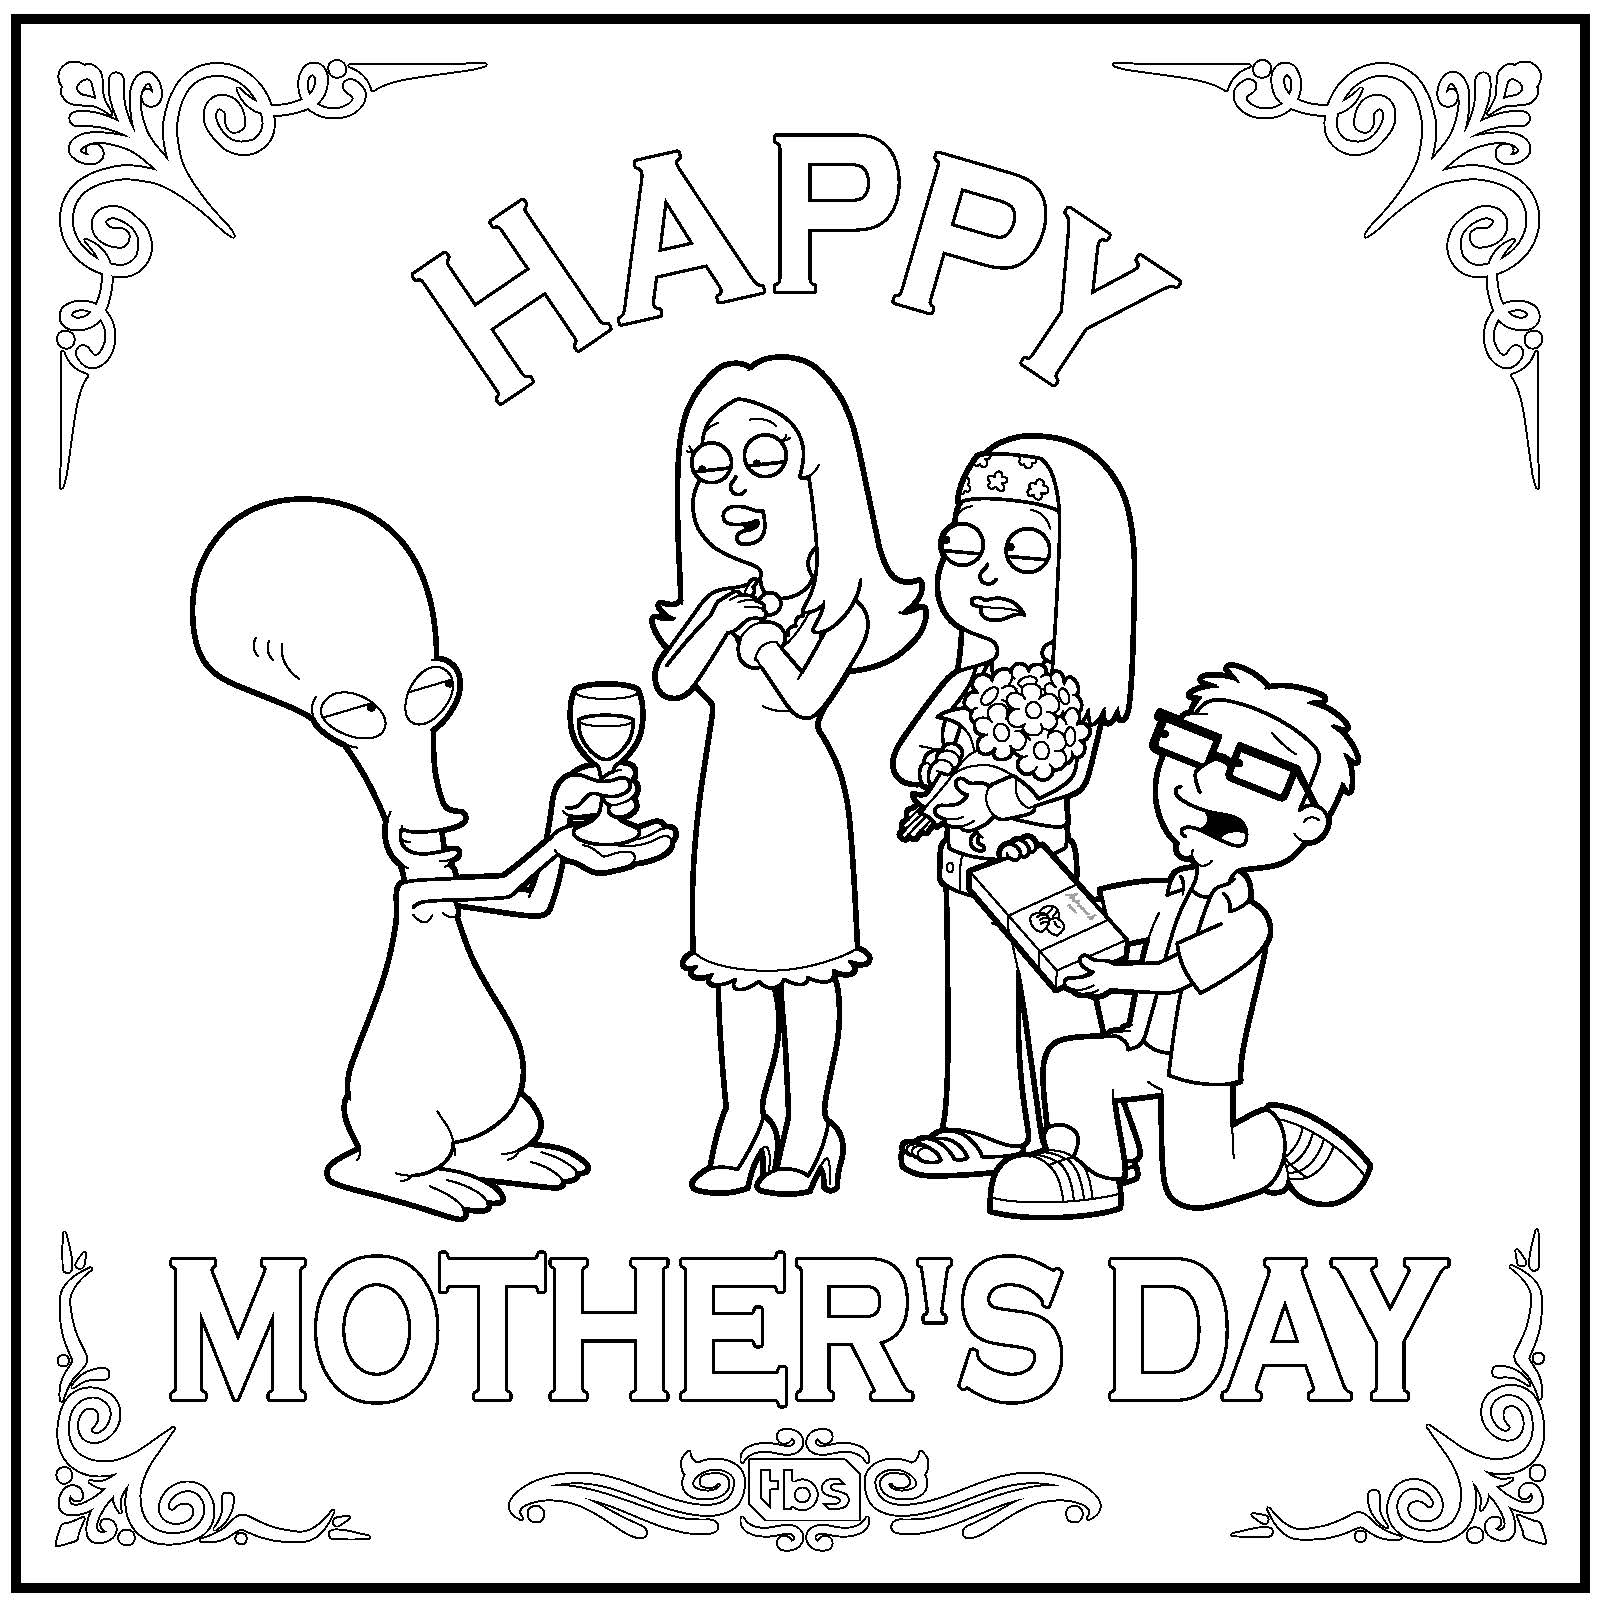 MothersDay2020_ColoringPage